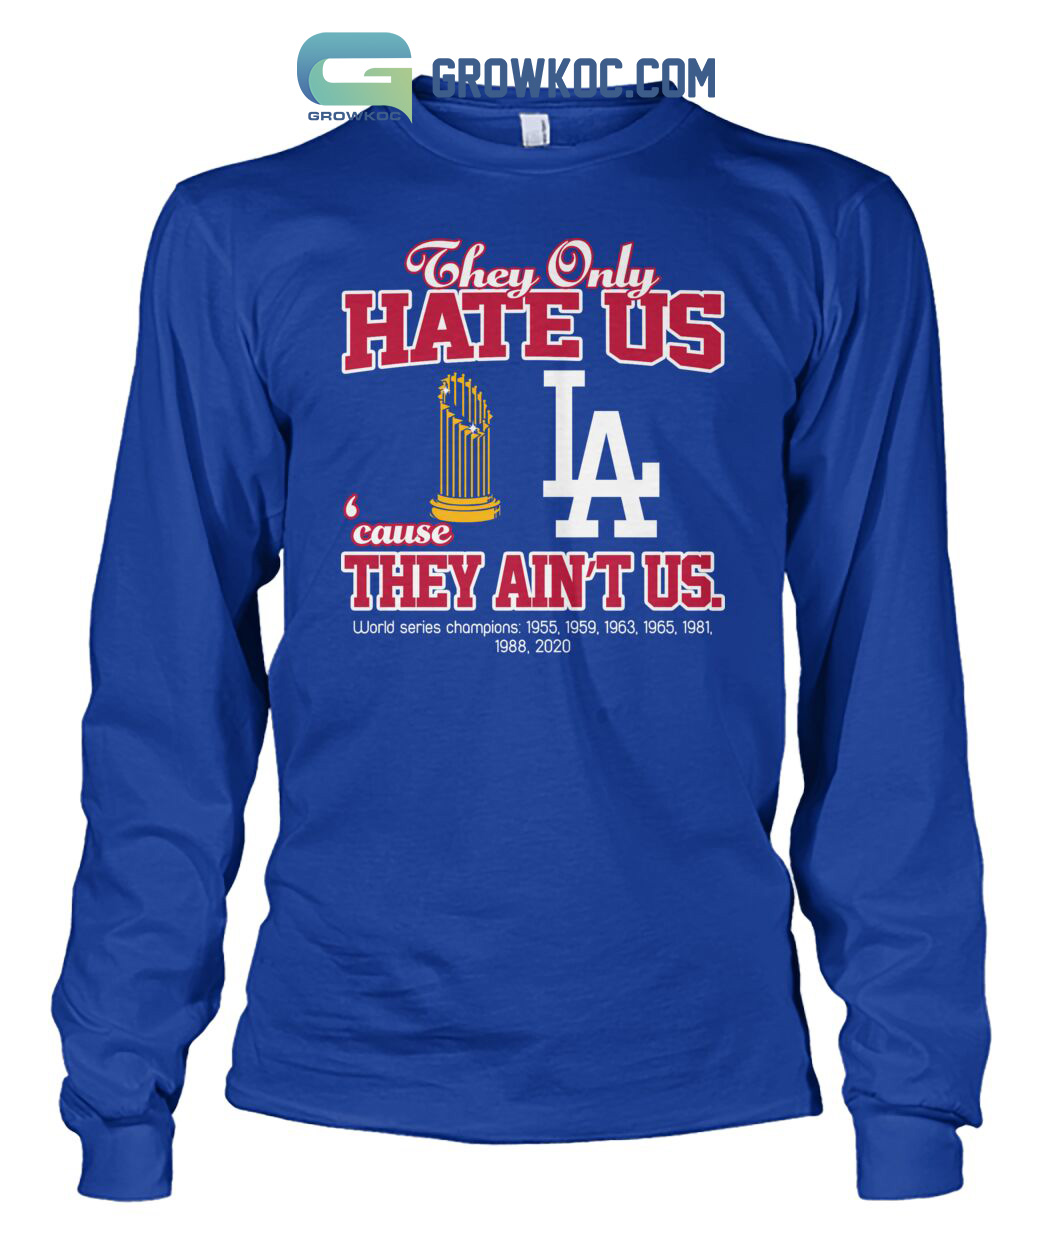 Never Underestimate An Old Man Who Understands Baseball And Loves La Dodgers  Shirt